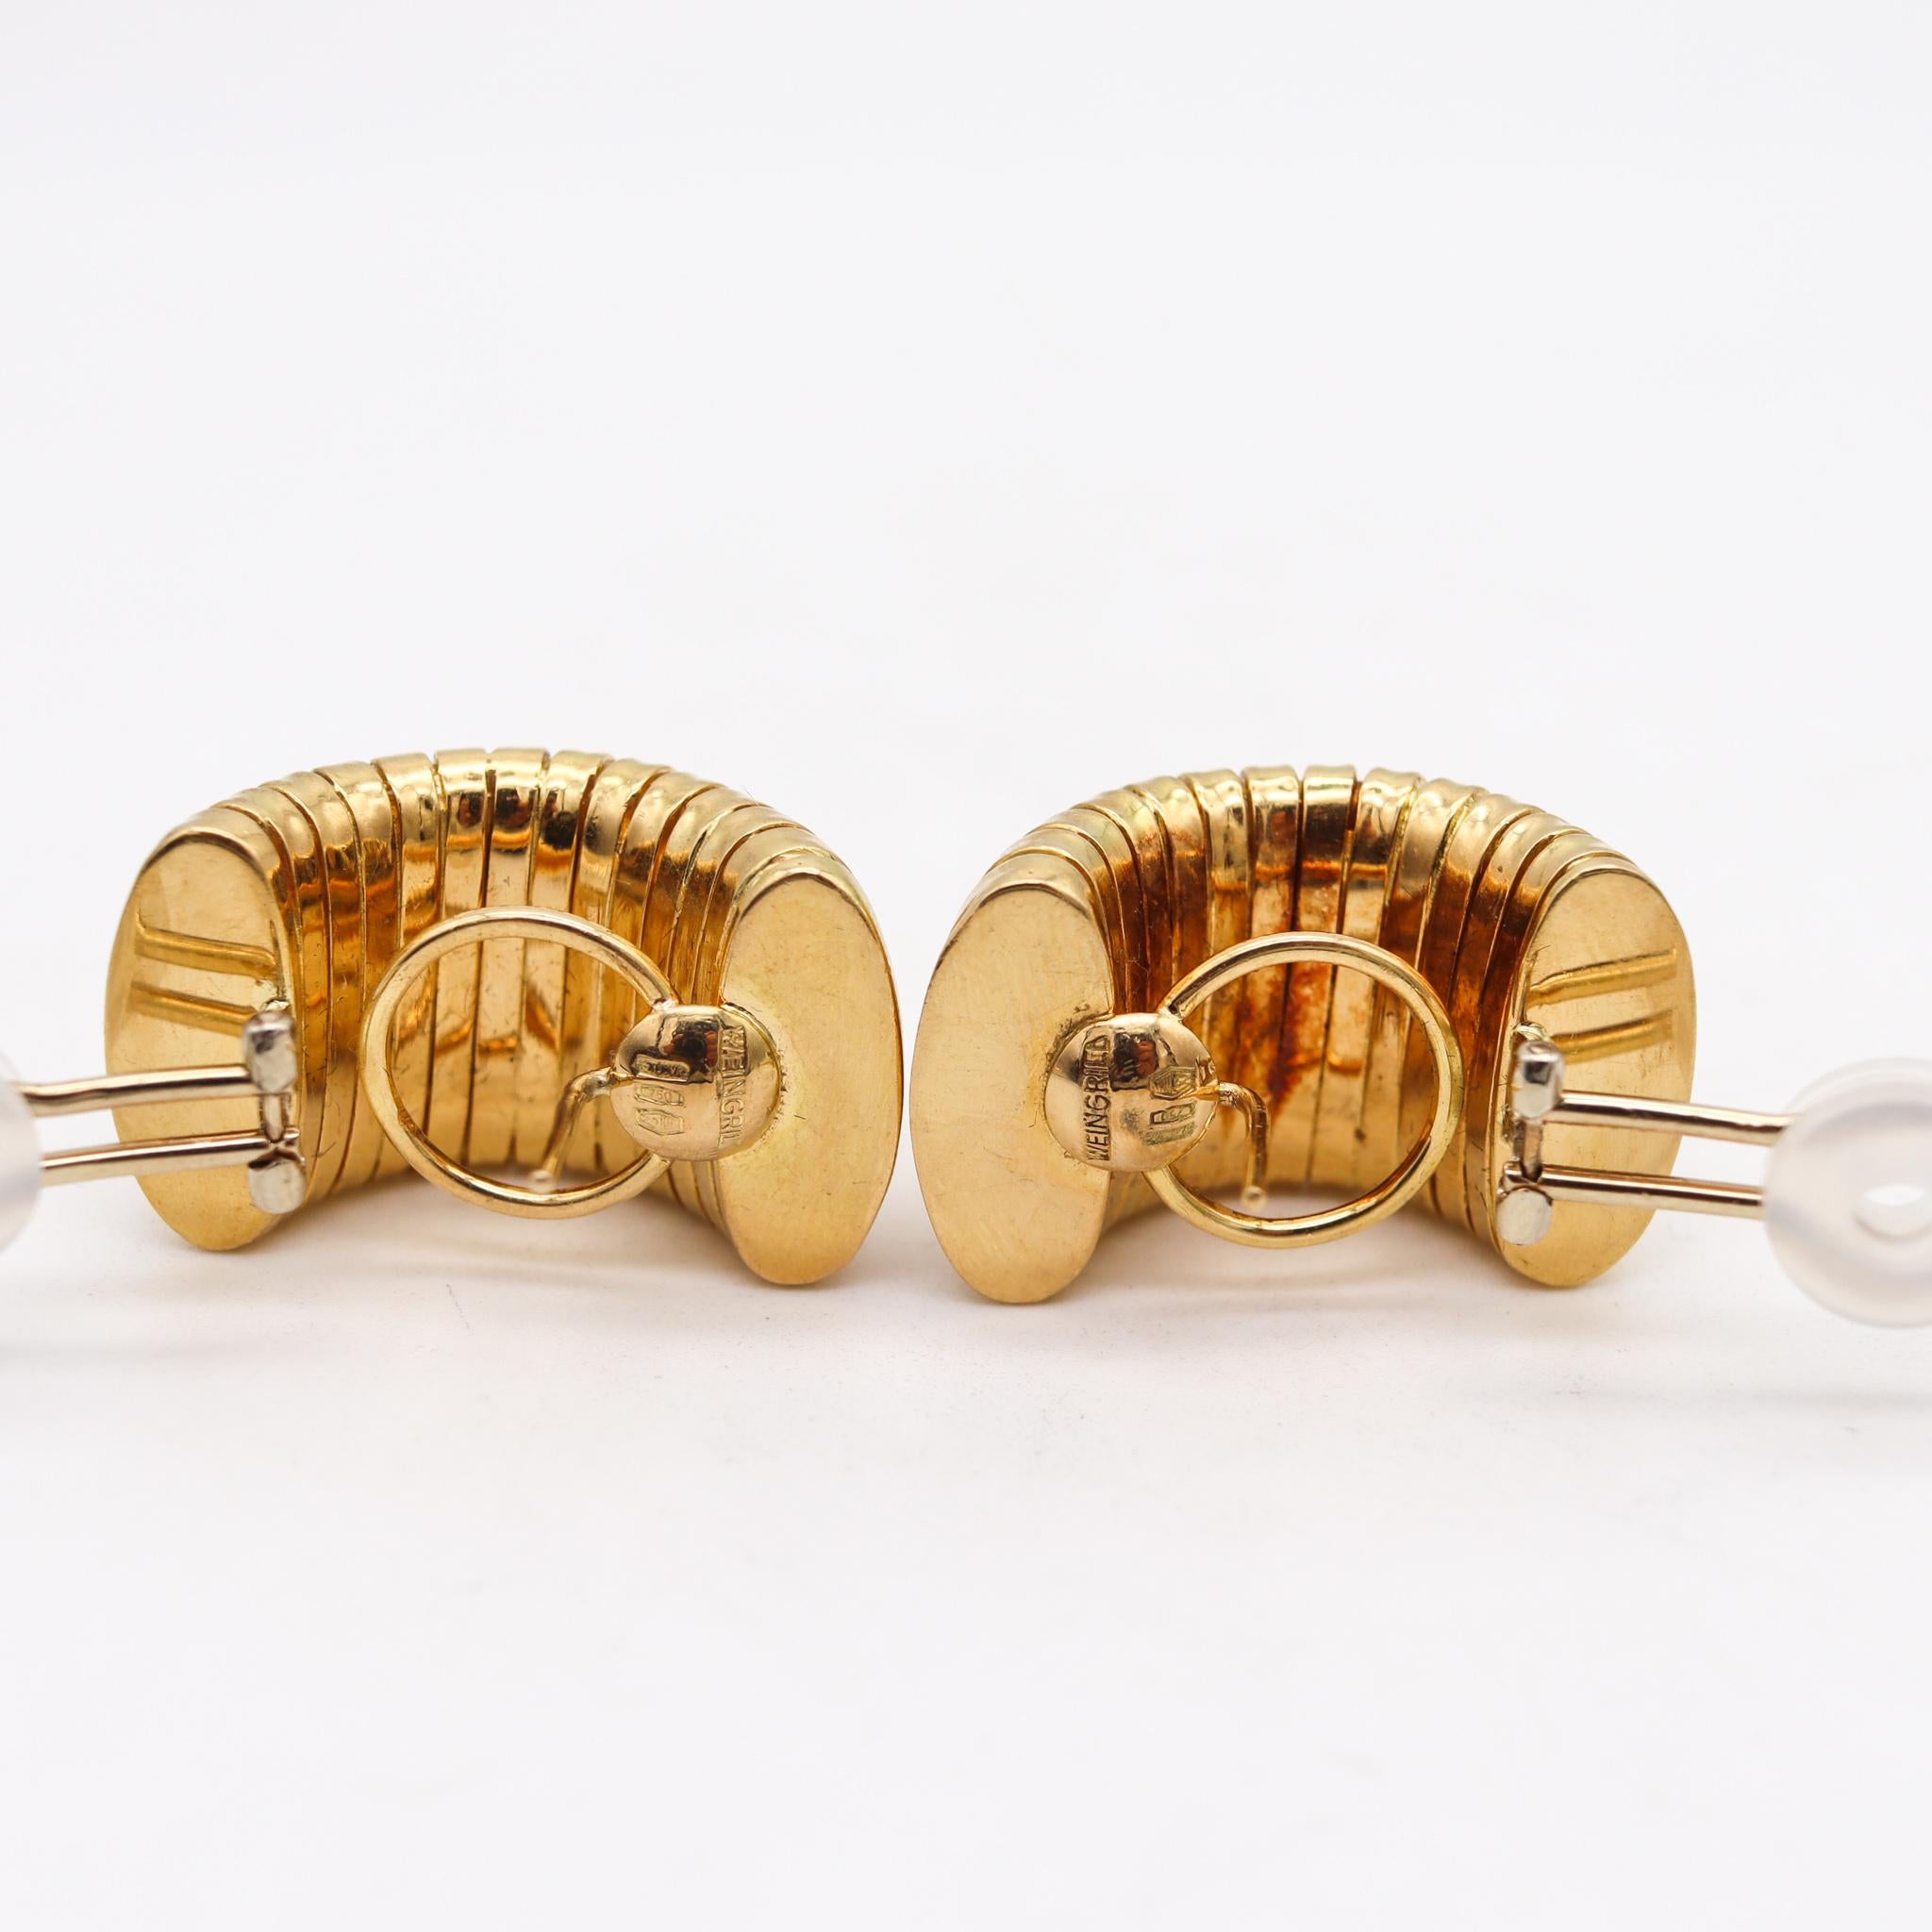 Modernist Carlo Weingrill 1970 Verona Tubogas Clips Earrings in Solid 18 Karat Yellow Gold